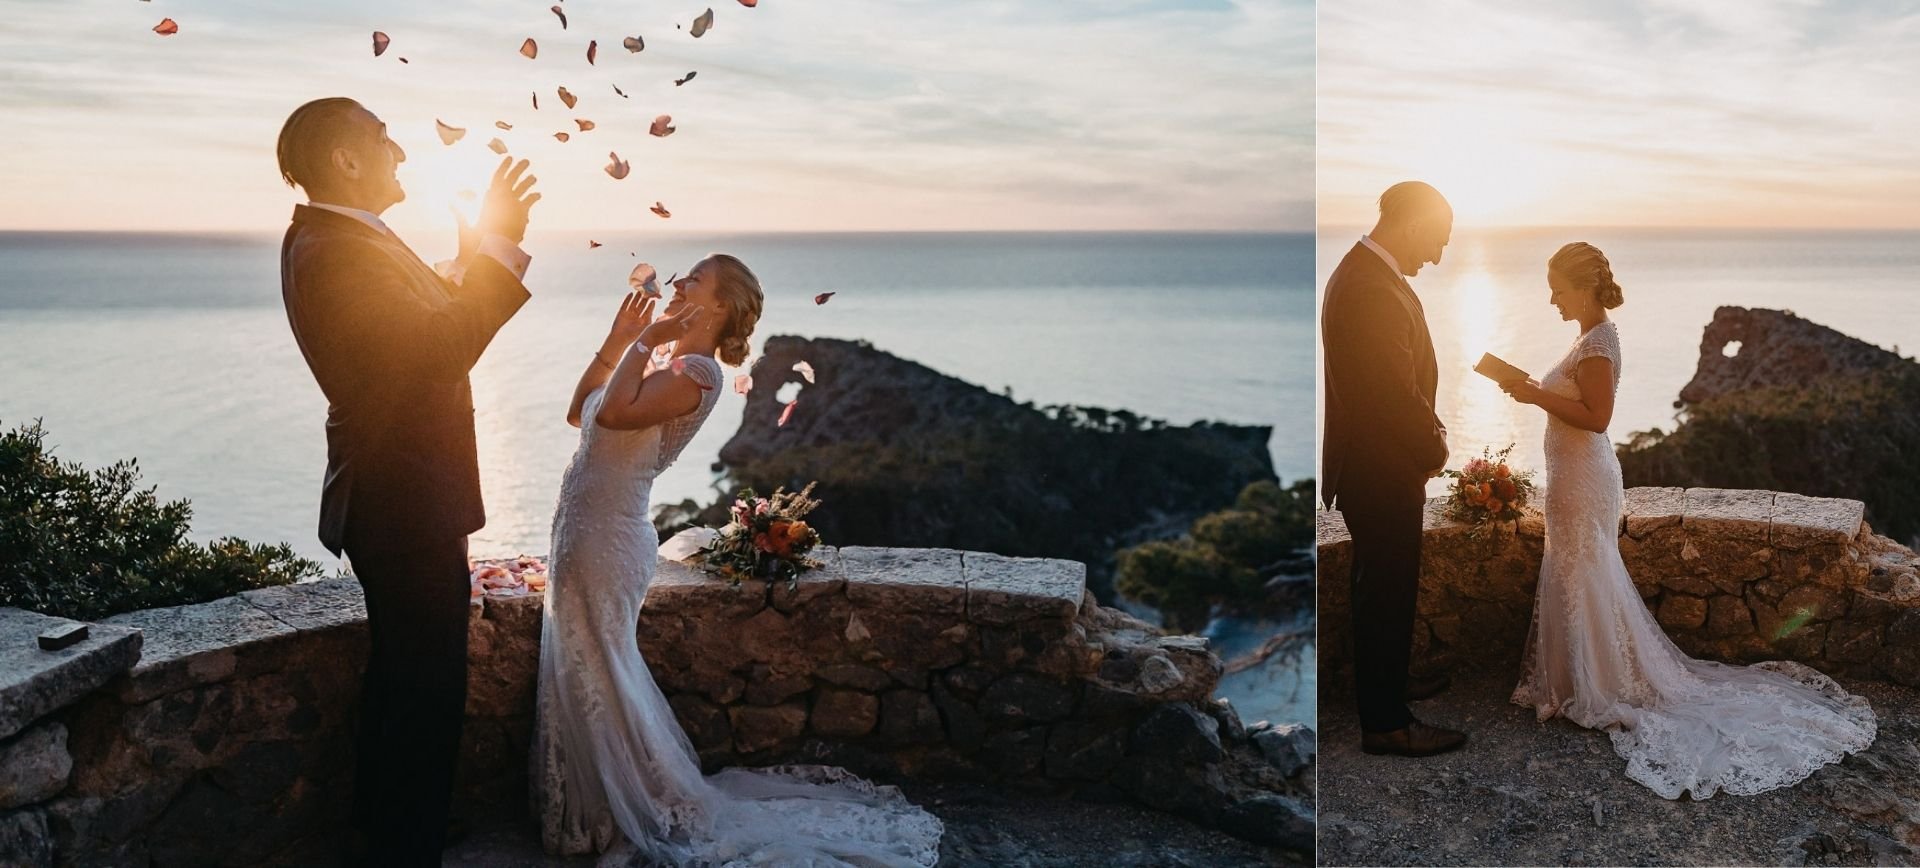 mallorca elopement package in spain - bride and groom at their sunset wedding in Mallorca